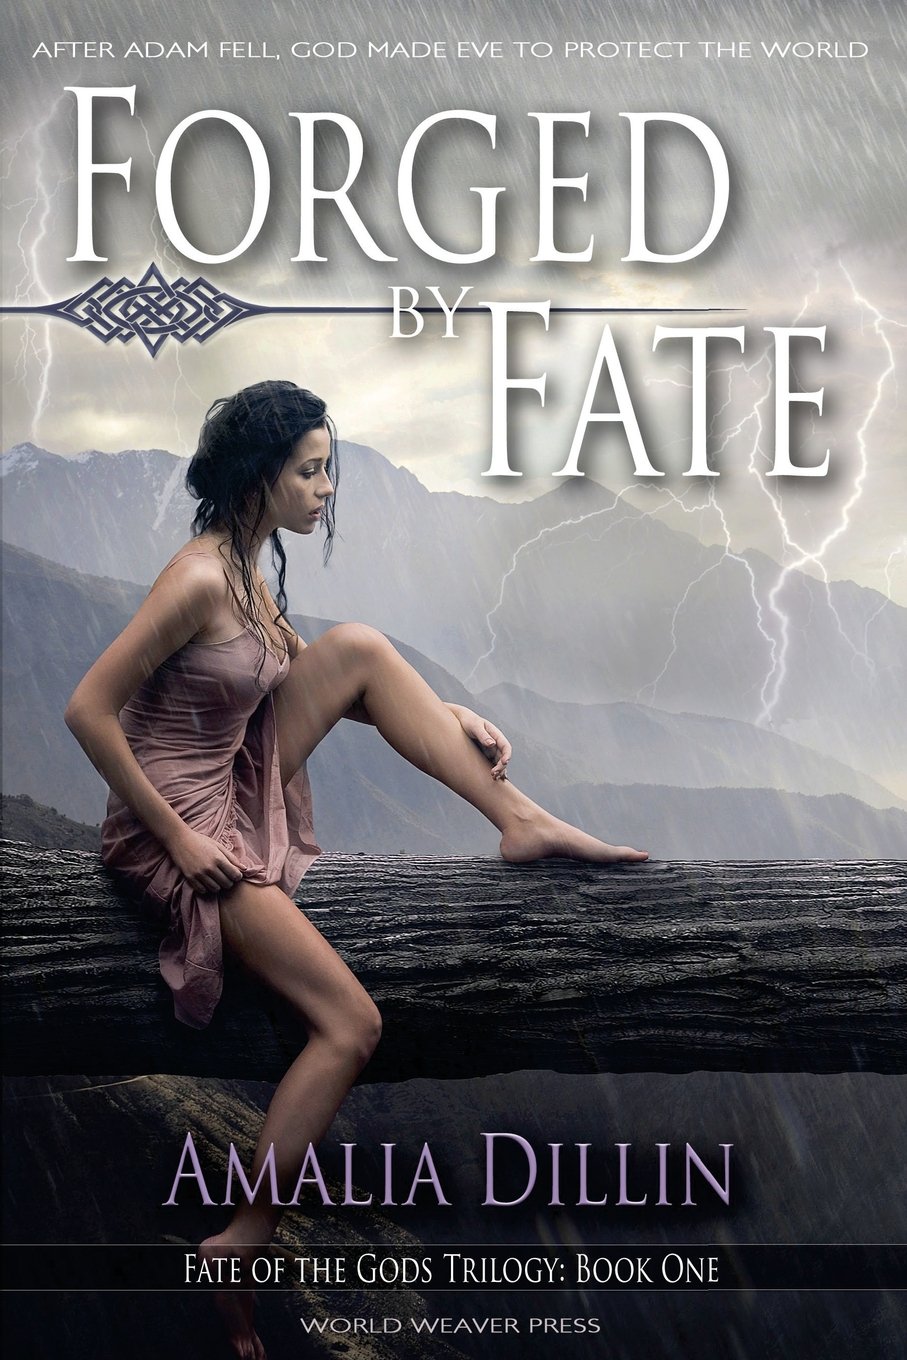 Fate of the Gods 01 - Forged by - Amalia T. Dillin